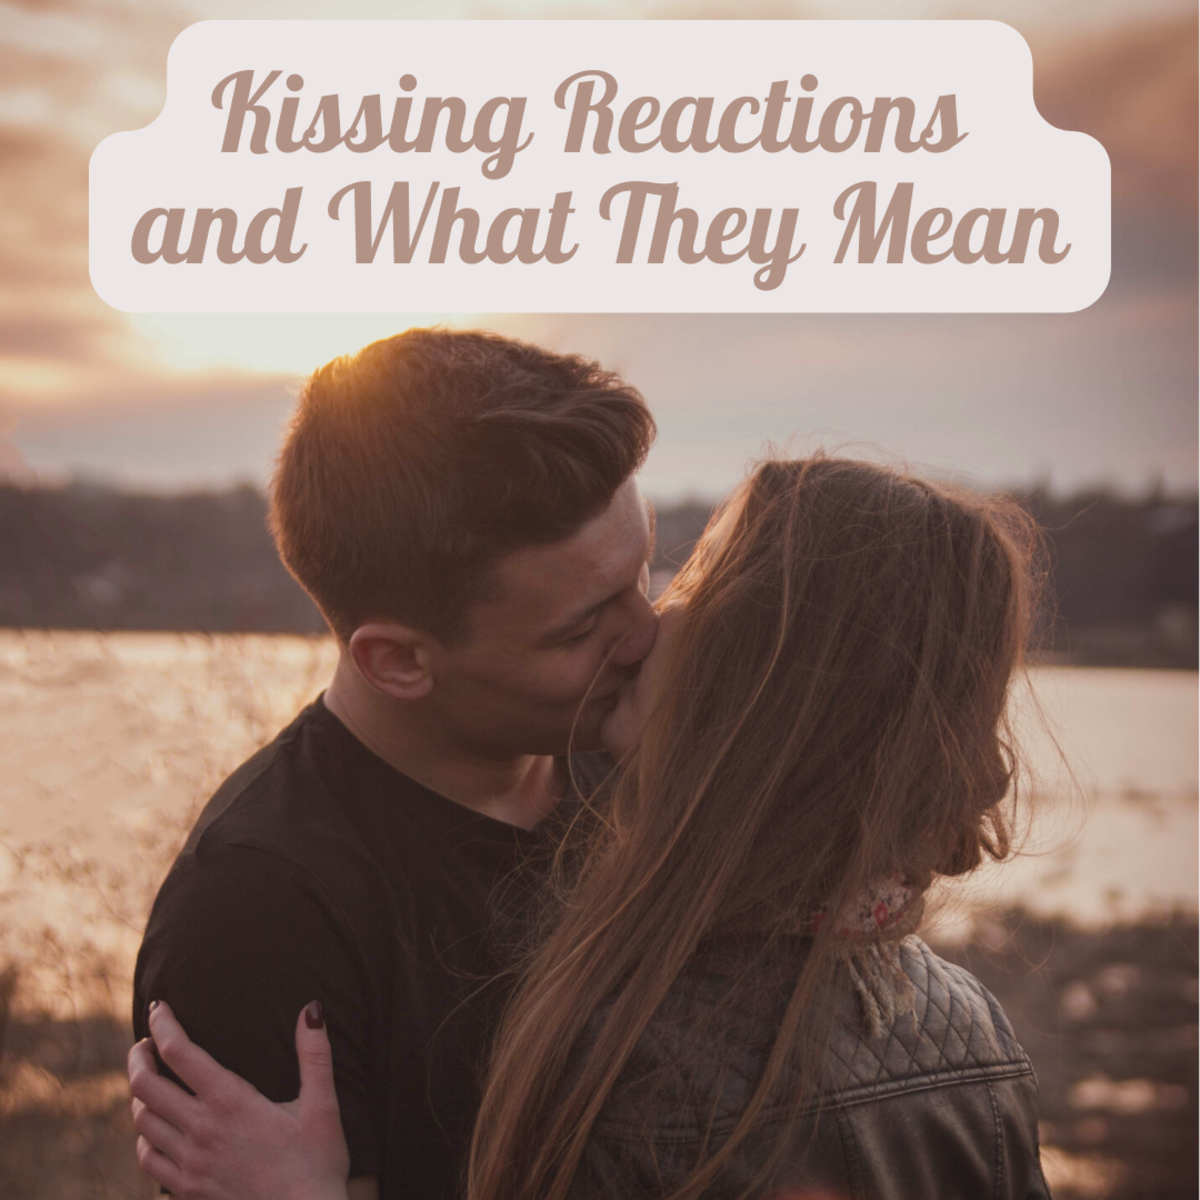 What does it mean when the person you're kissing reacts in a strange way? Here are a few possible reactions and how they might be interpreted. 